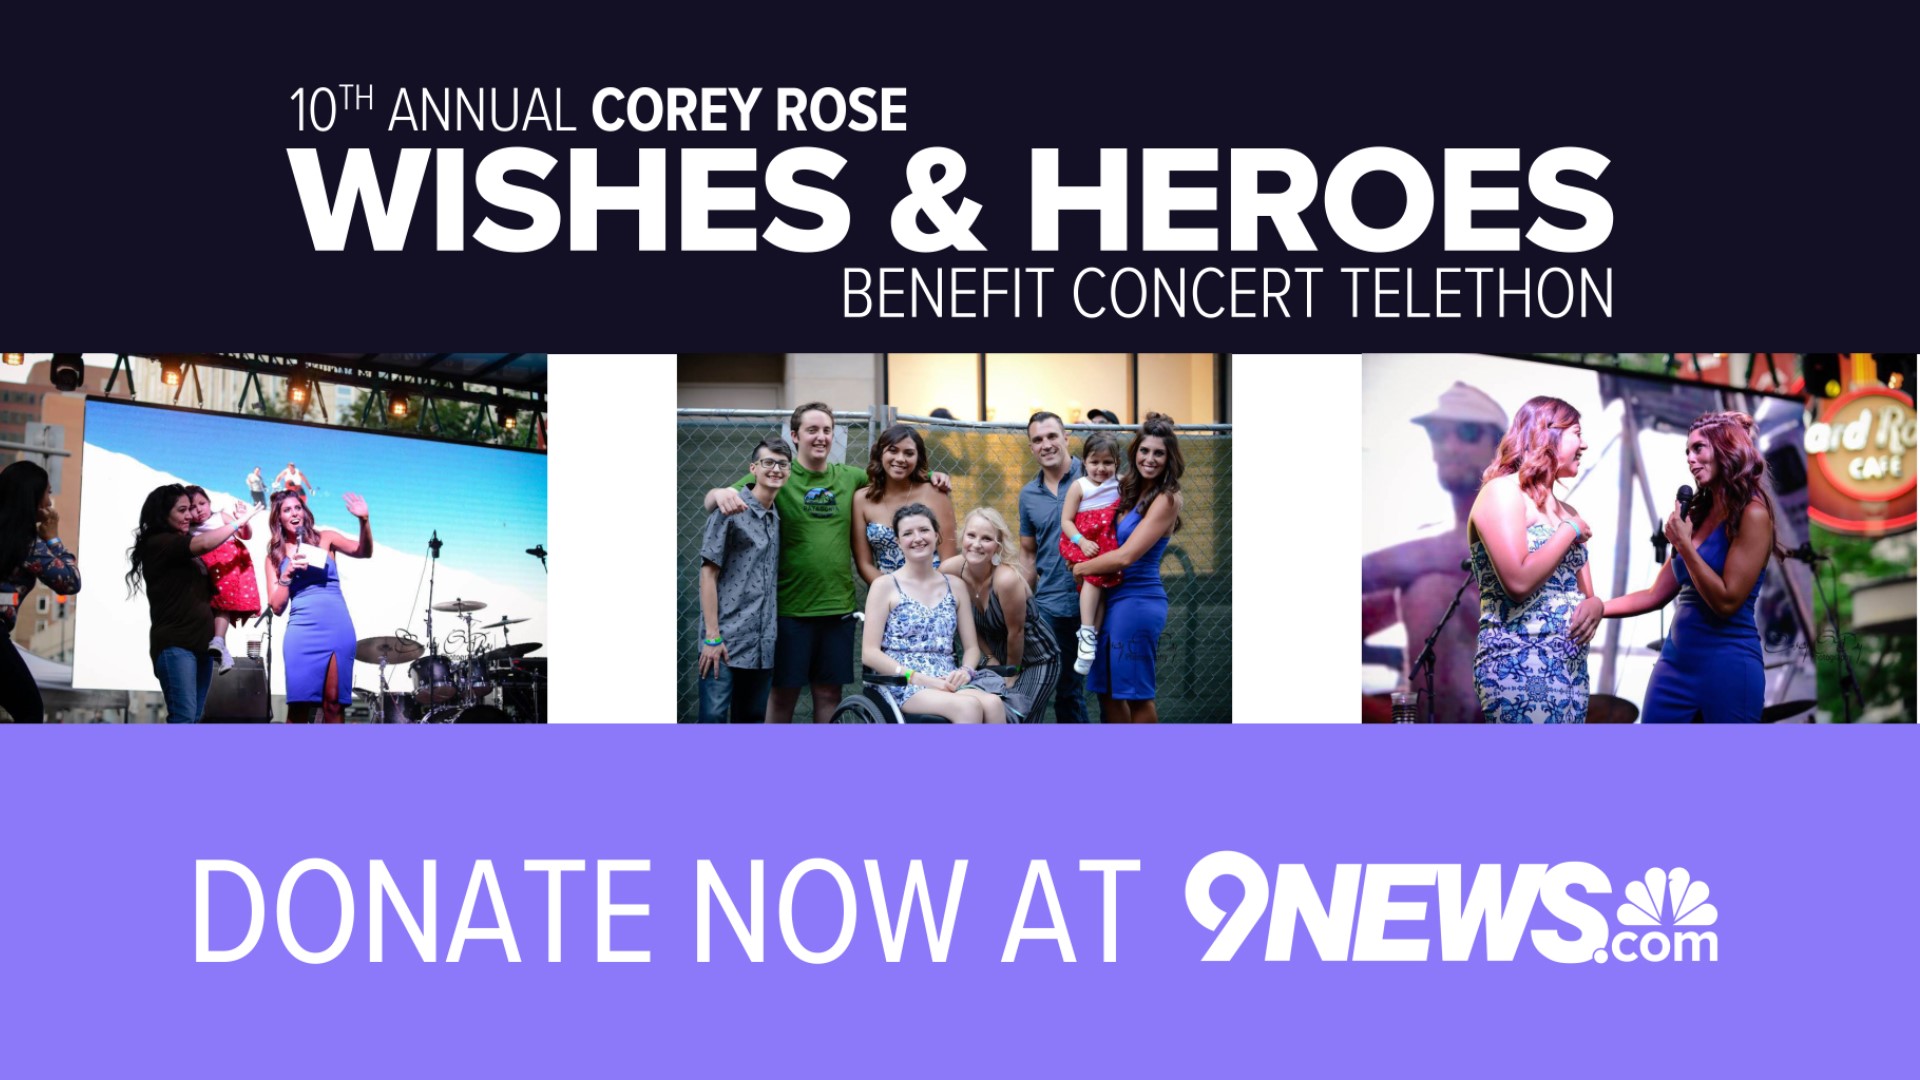 Watch the Corey Rose benefit concert on Aug. 1 at 6 p.m. on Channel 20.